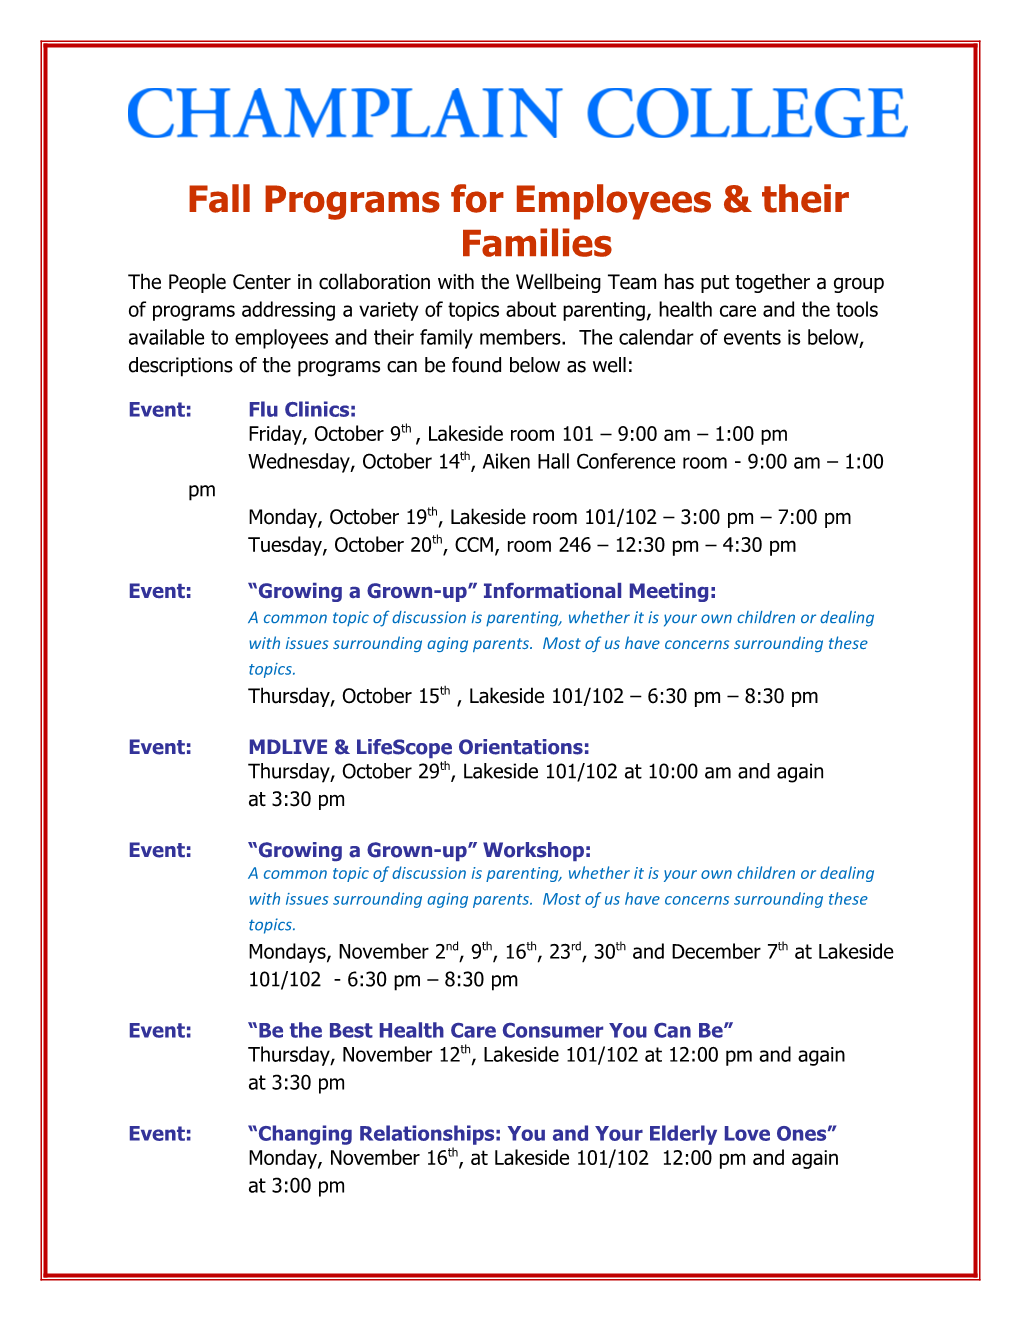 Fall Programs for Employees & Their Families